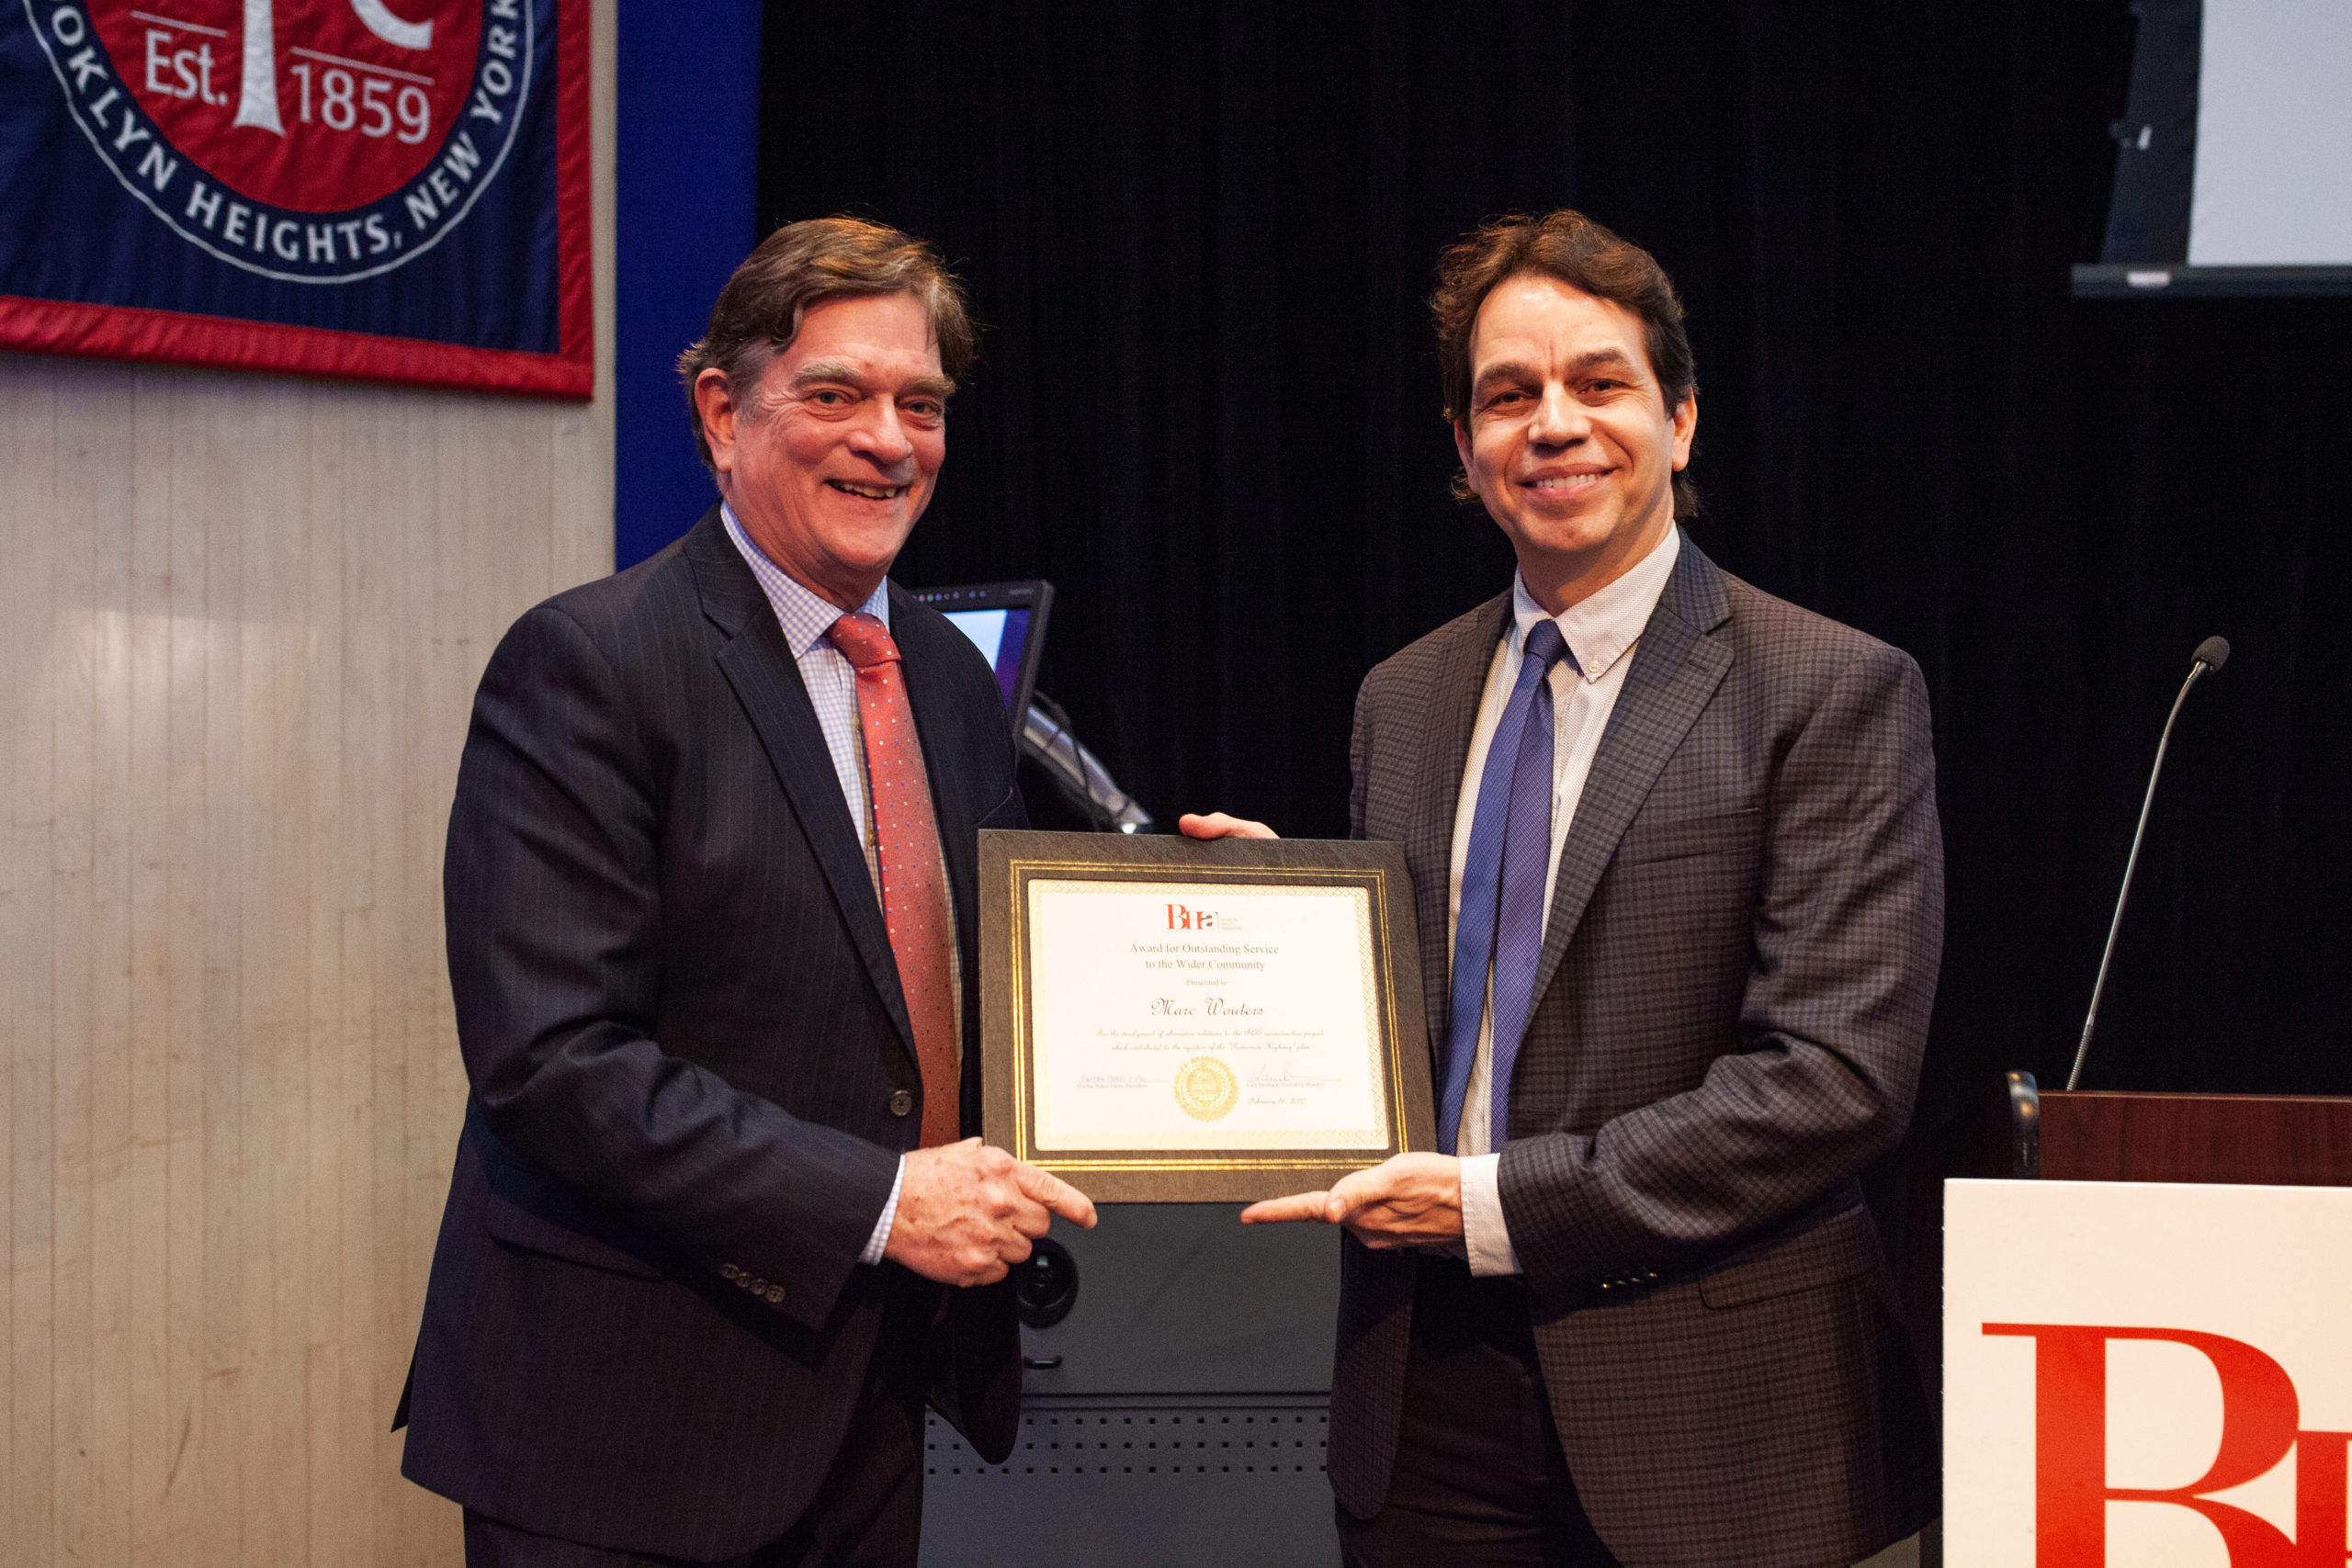 Tom Stewart, left, presents a community service award to Marc Wouters of Marc Wouters Studio at the Brooklyn Heights Association Annual meeting on Feb. 26, 2020 at St. Francis College. Wouters contributed to the idea process for the Brooklyn-Queens Expressway repair. Photo: Paul Frangipane/Brooklyn Eagle